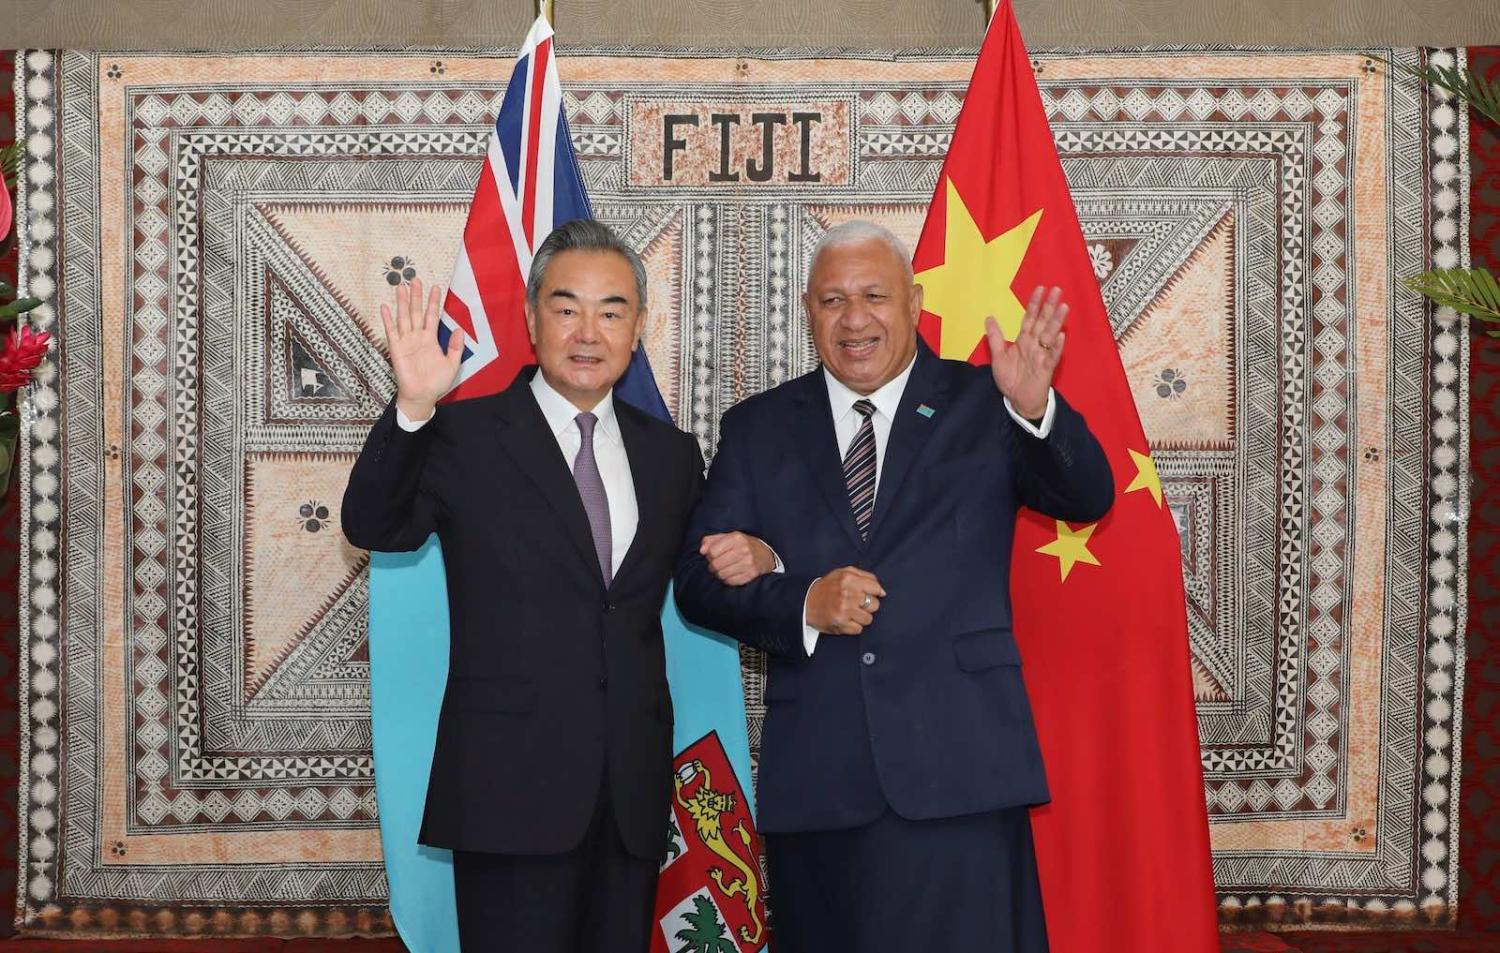 China’s Foreign Minister Wang Yi in Suva last mont with Fiji’s Prime Minister Voreqe “Frank” Bainimarama (Zhang Yongxing/Xinhua via Getty Images)